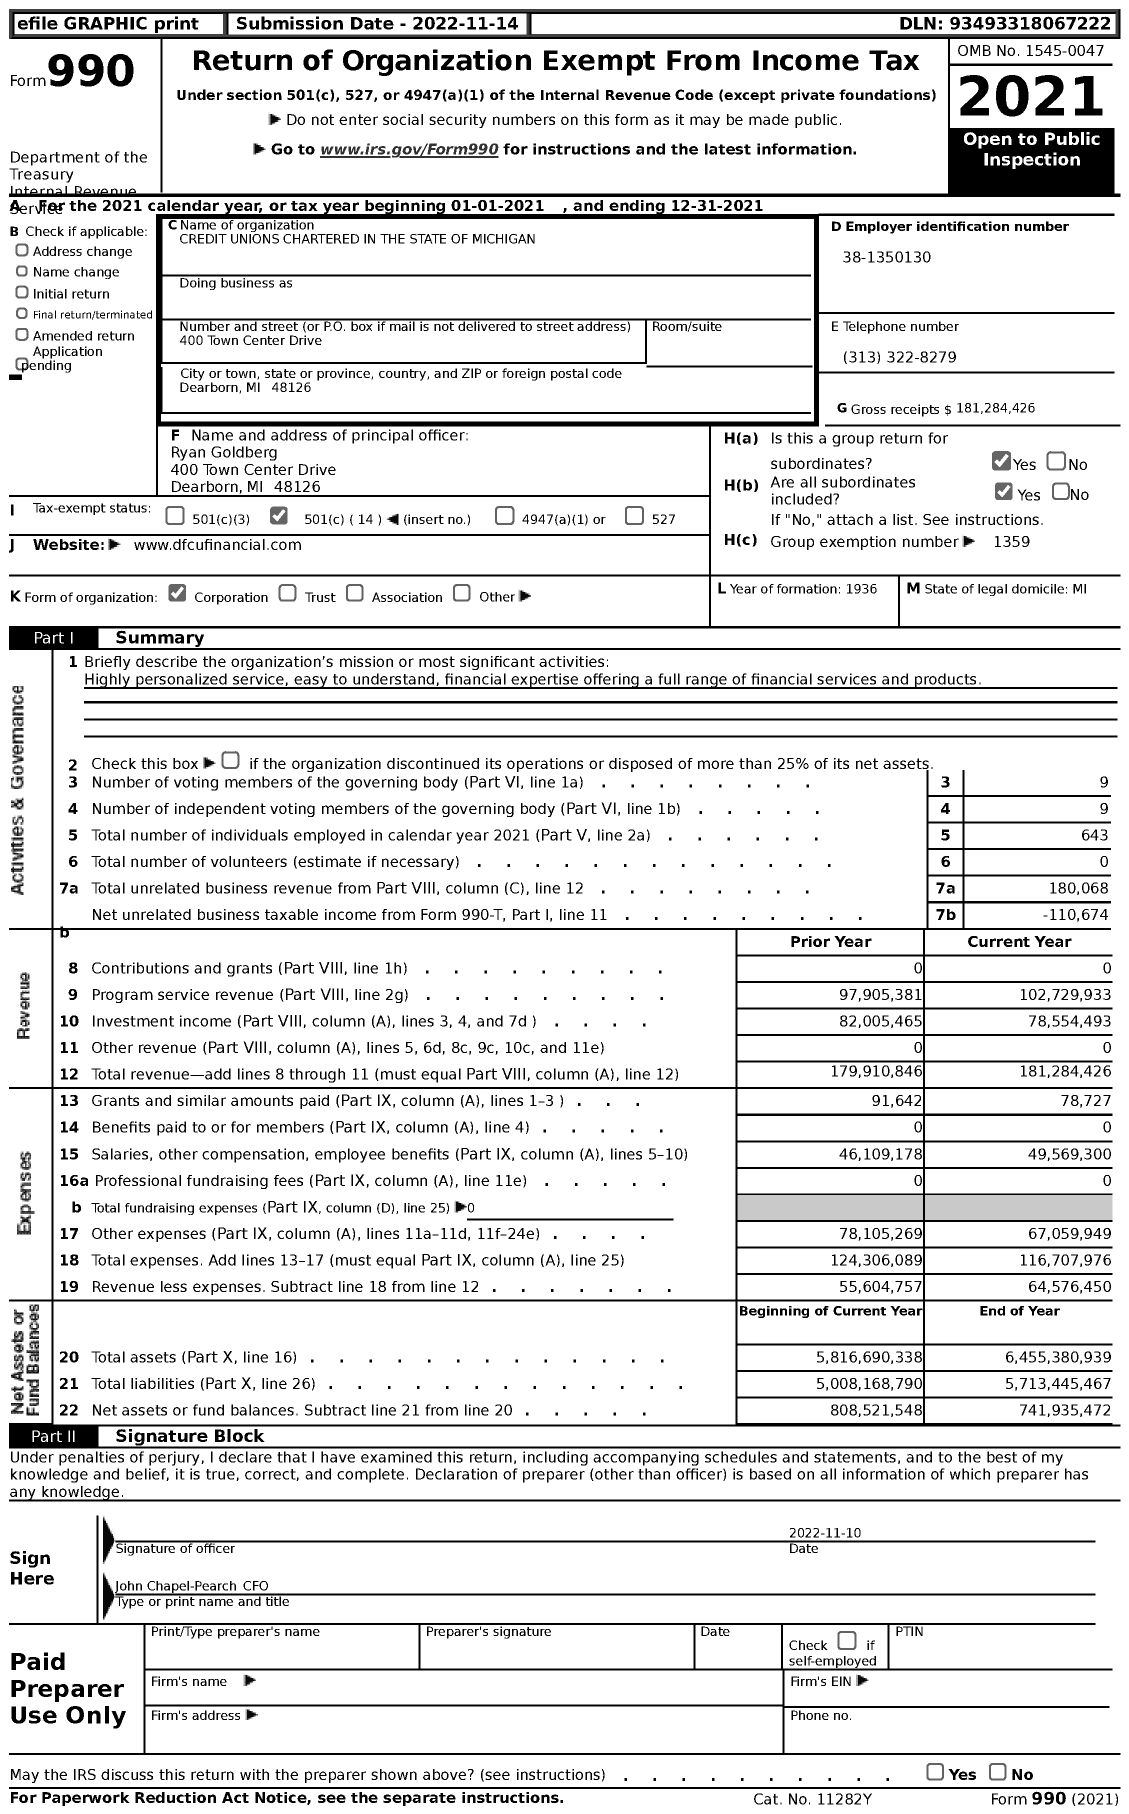 Image of first page of 2021 Form 990 for CREDIT UNIONS CHARTERED IN THE STATE OF MICHIGAN - 96 DFCU Financial